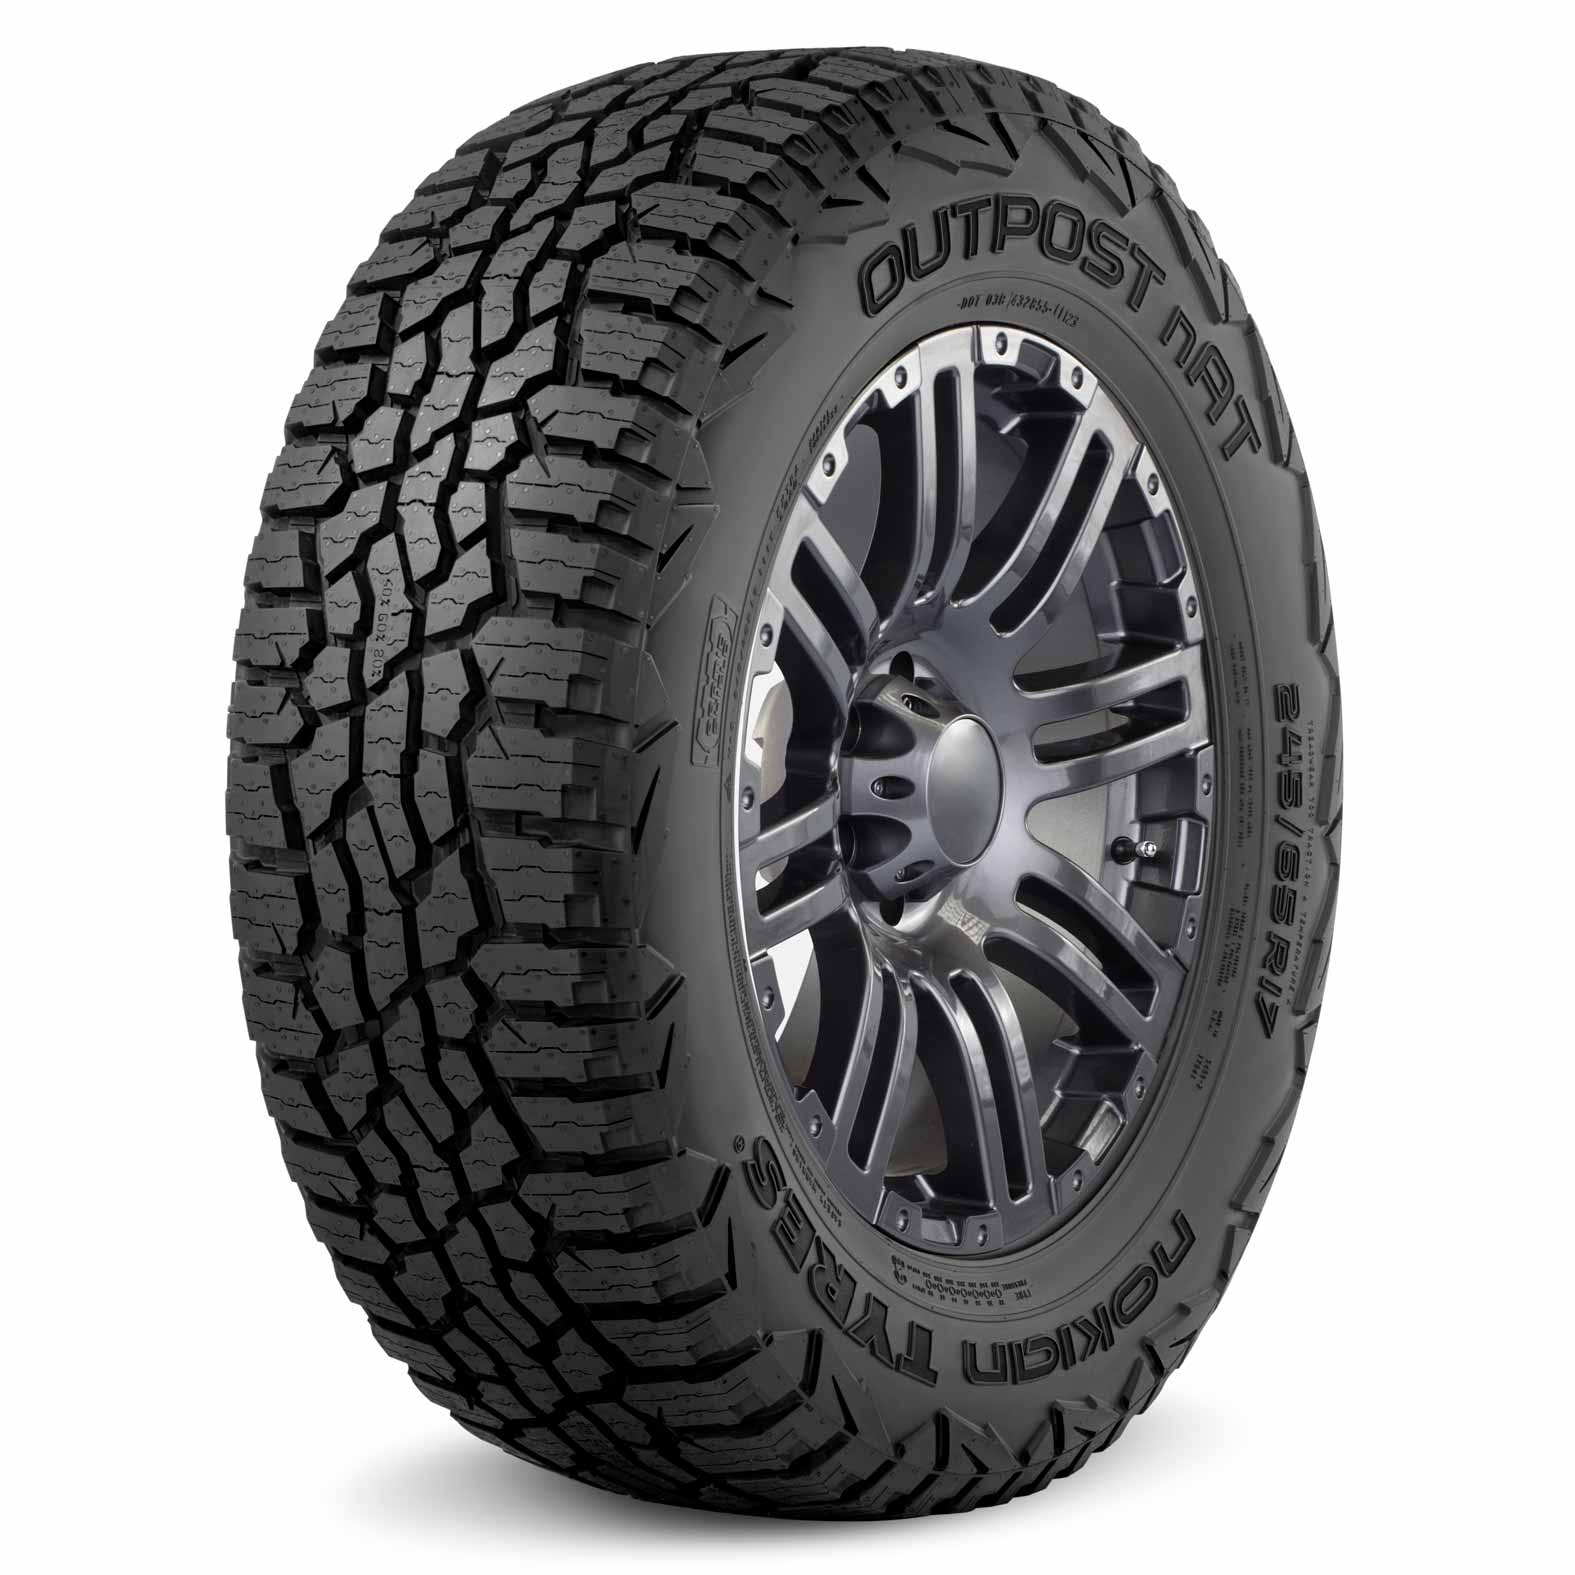 Nokian Outpost nAT Tires for All-Weather